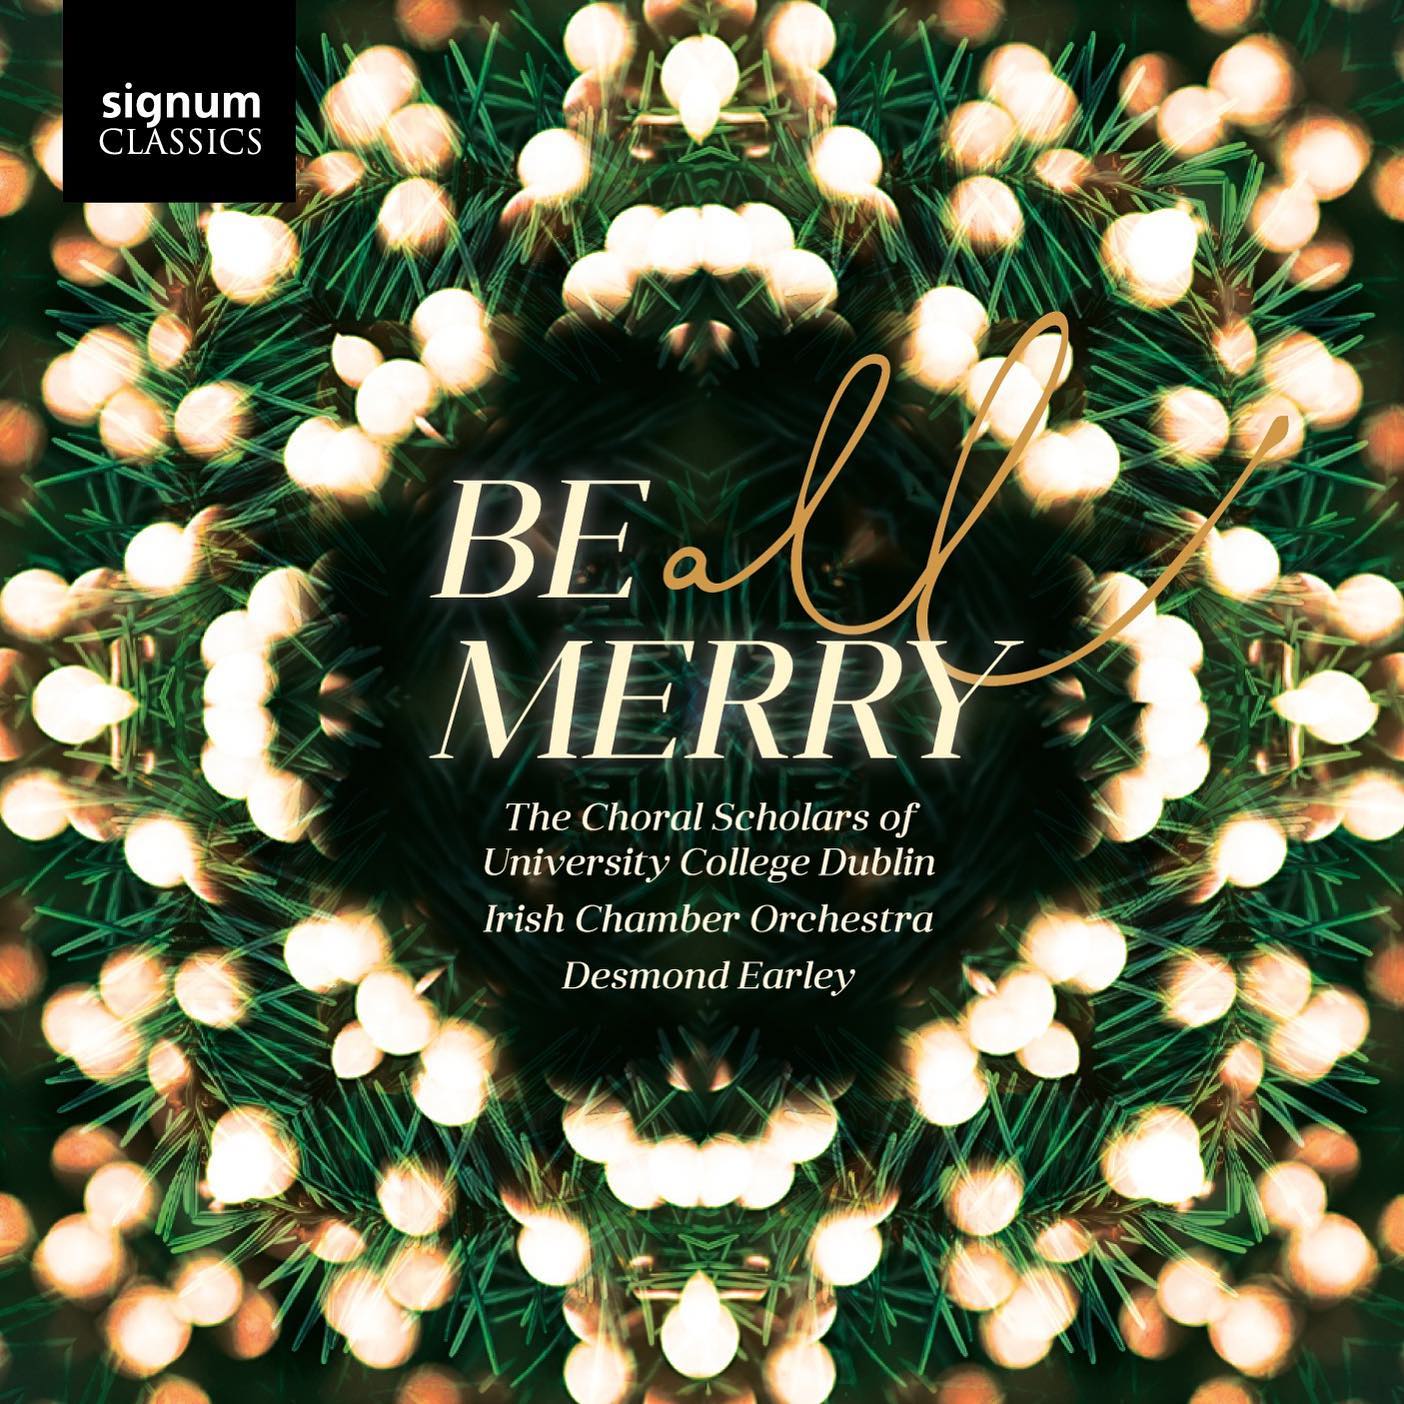 “Be All Merry”: A Collaborative Christmas Album